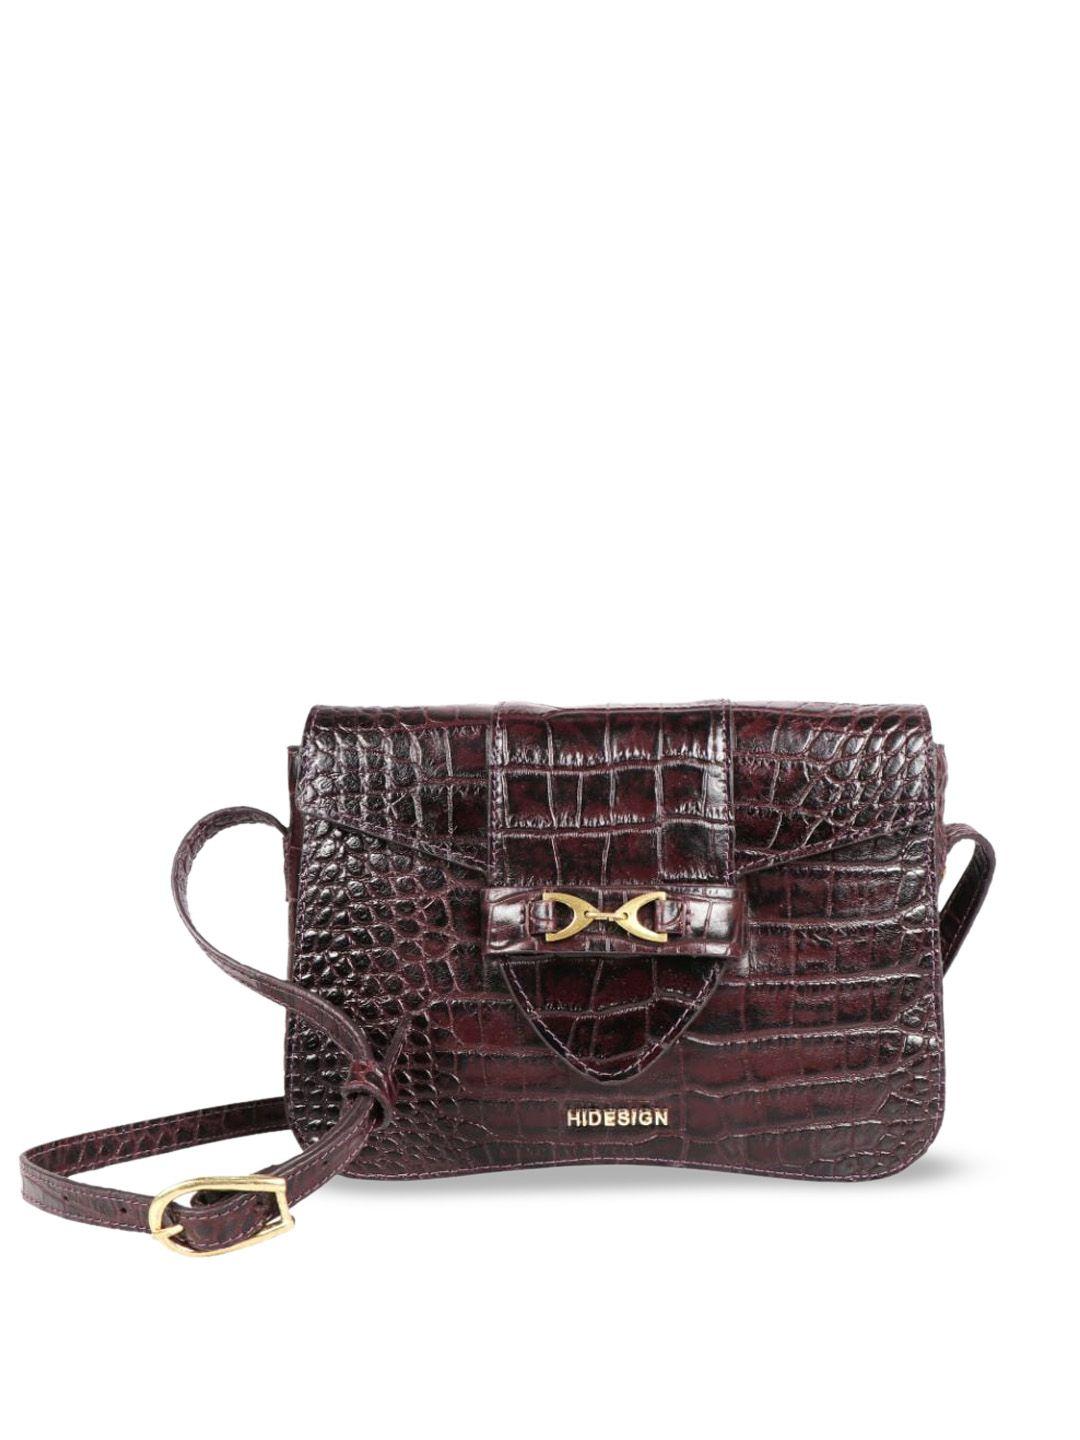 hidesign-textured-leather-structured-sling-bag